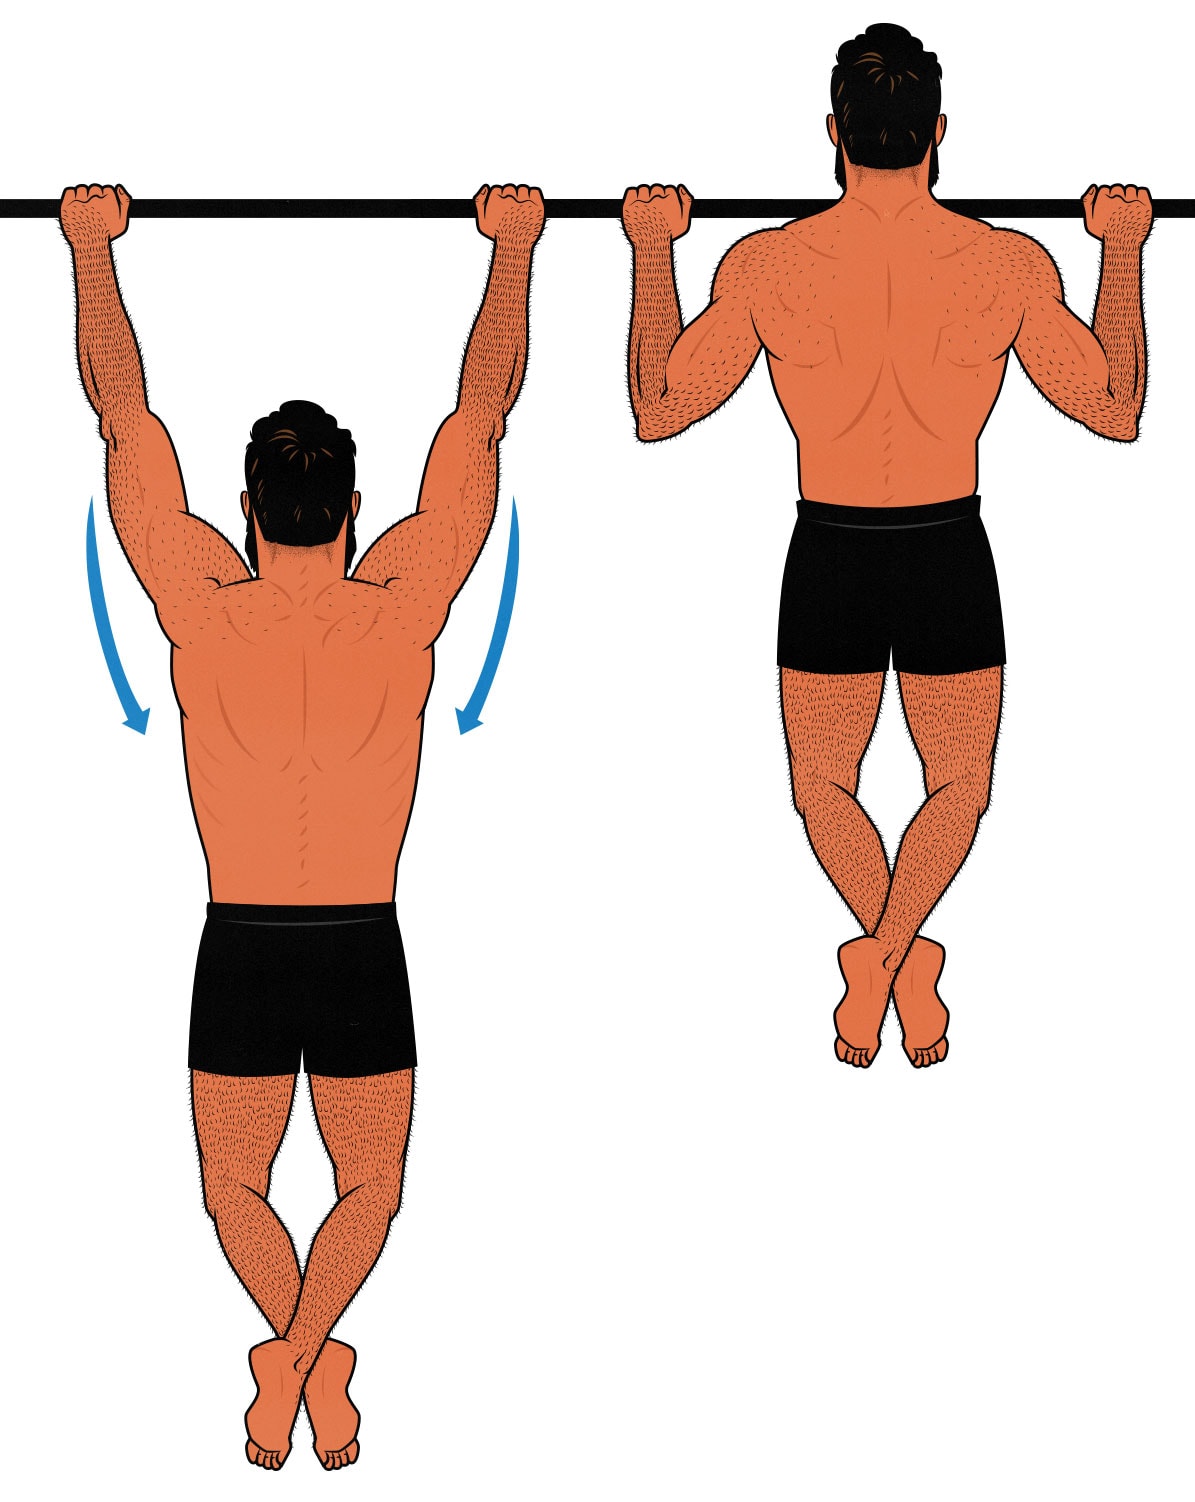 Diagram showing how to do the pull-up exercise. Illustrated by Shane Duquette for Outlift.